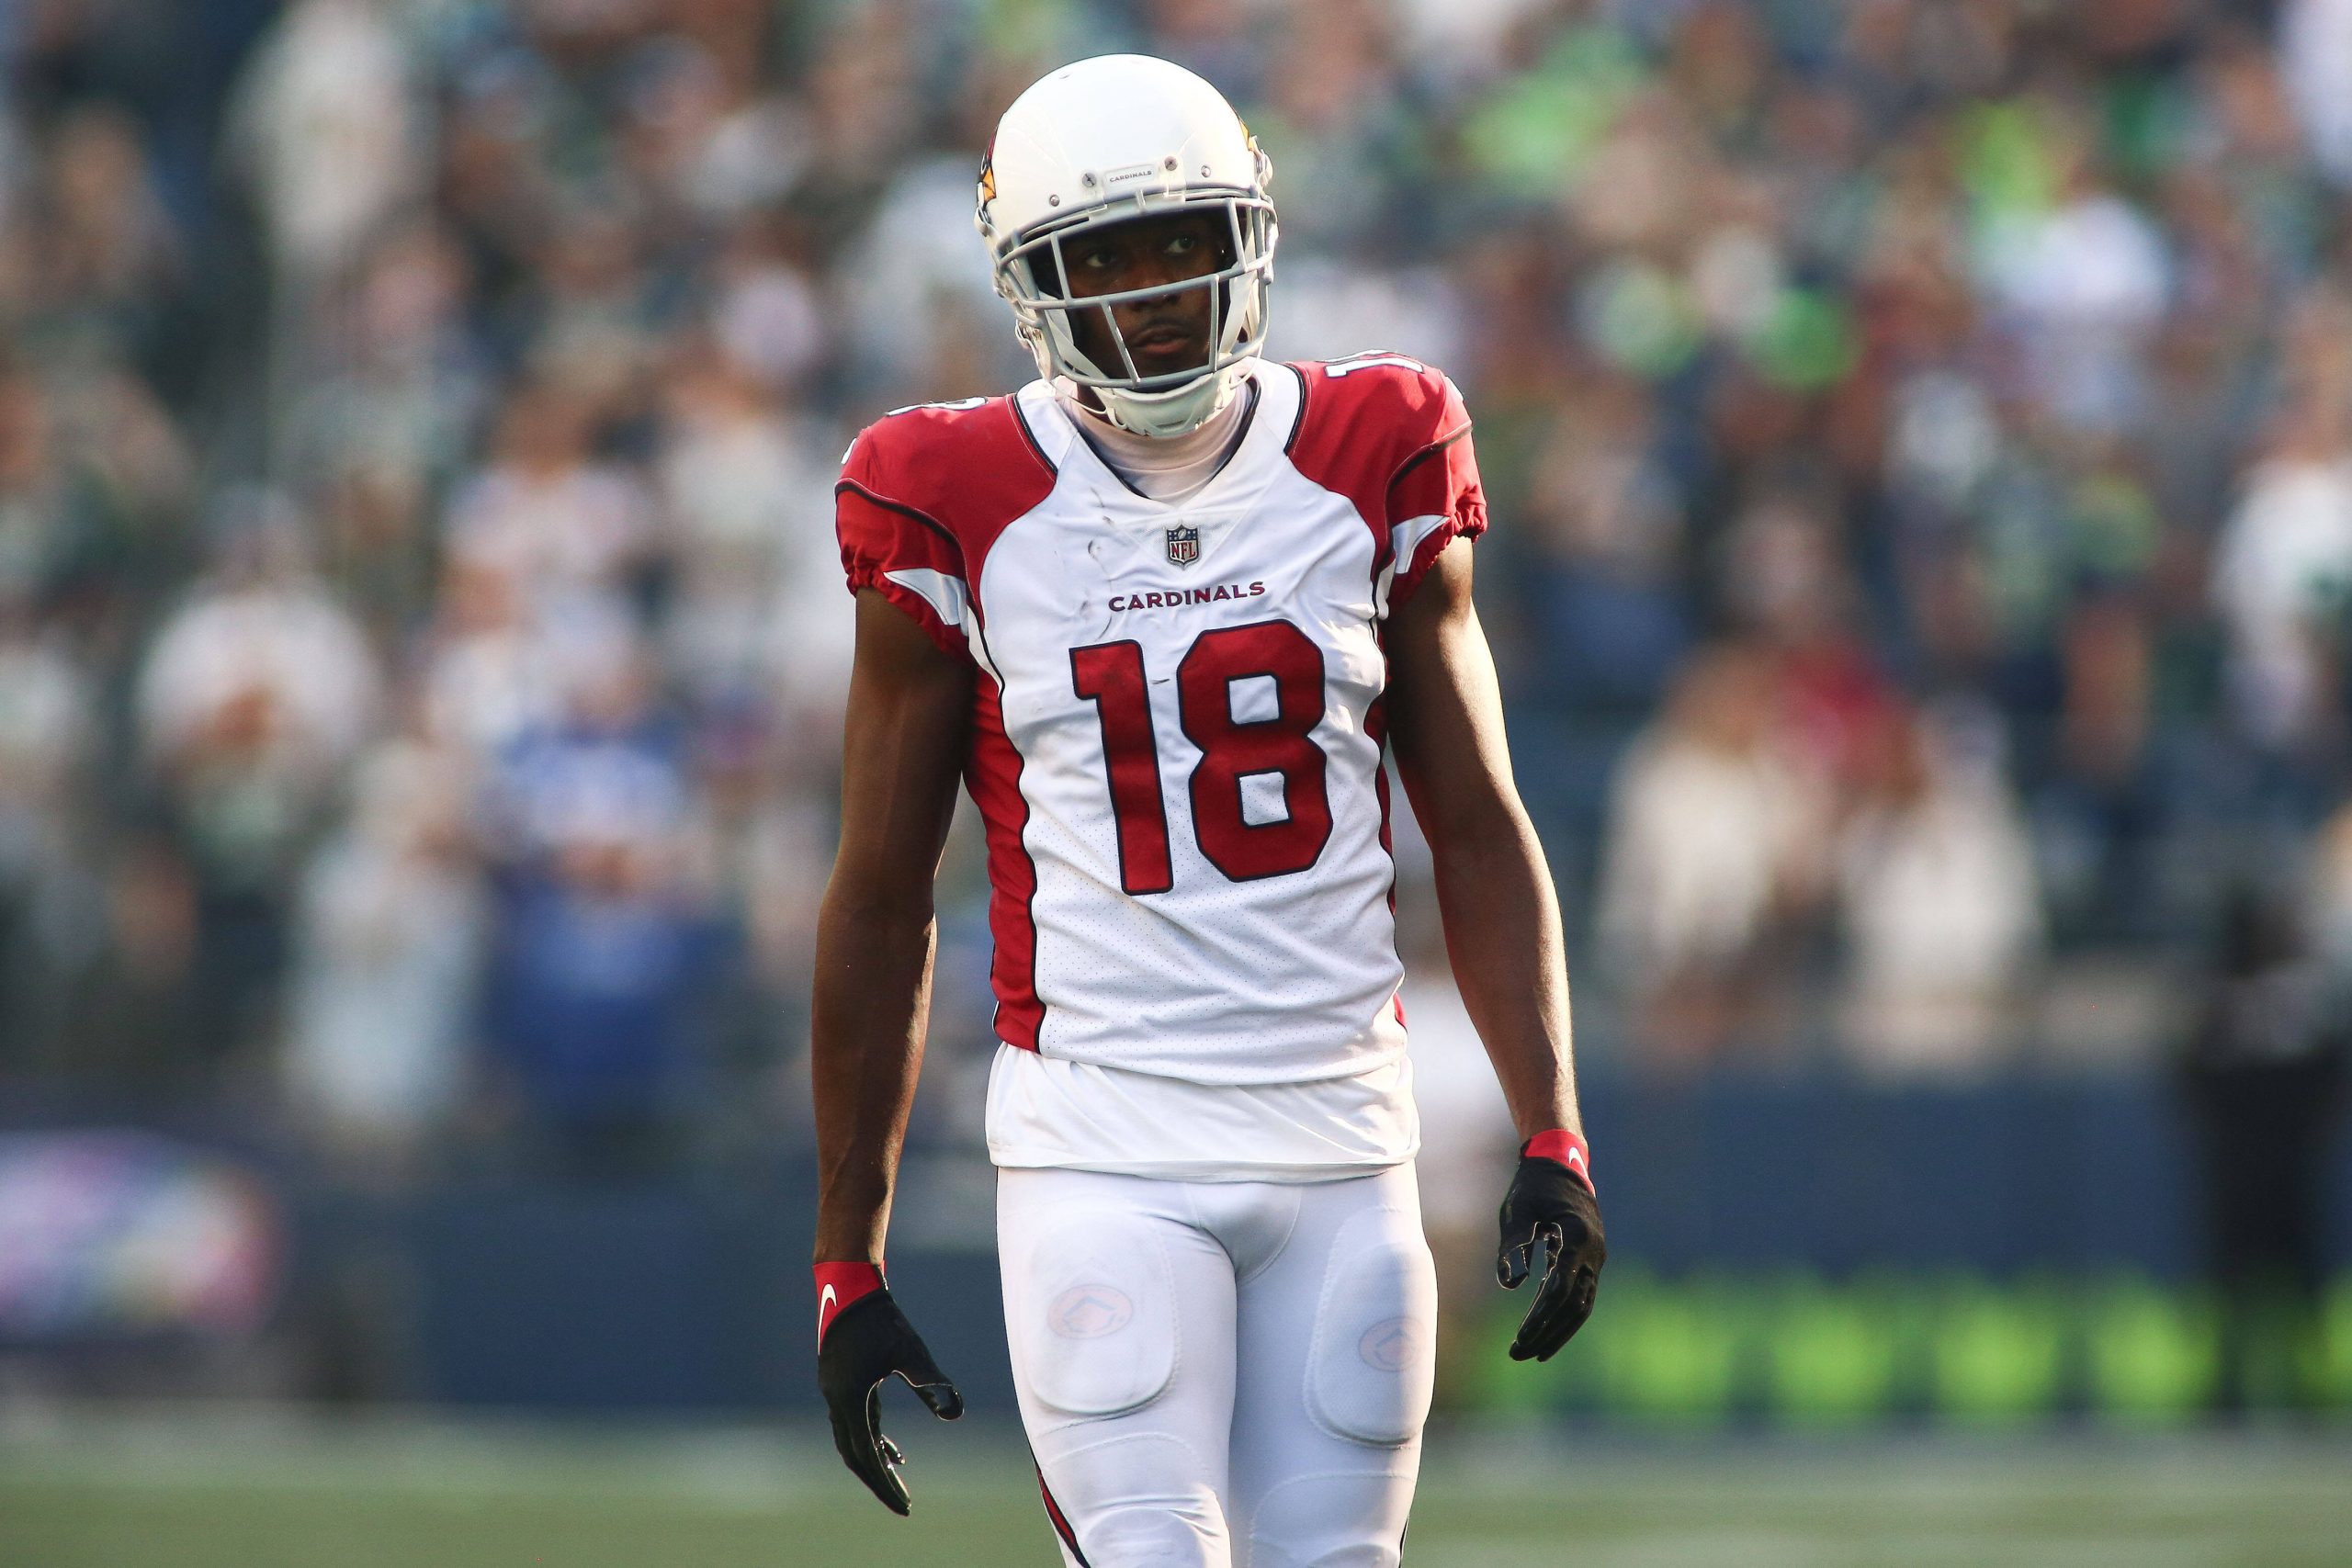 October 16, 2022: Arizona Cardinals wide receiver A.J. Green 18 walks on the field during an NFL, American Football Herren, USA football game in Seattle, WA. /CSM Seattle United States of America - ZUMAc04_ 20221016_zaf_c04_465 Copyright: xSeanxBrownx